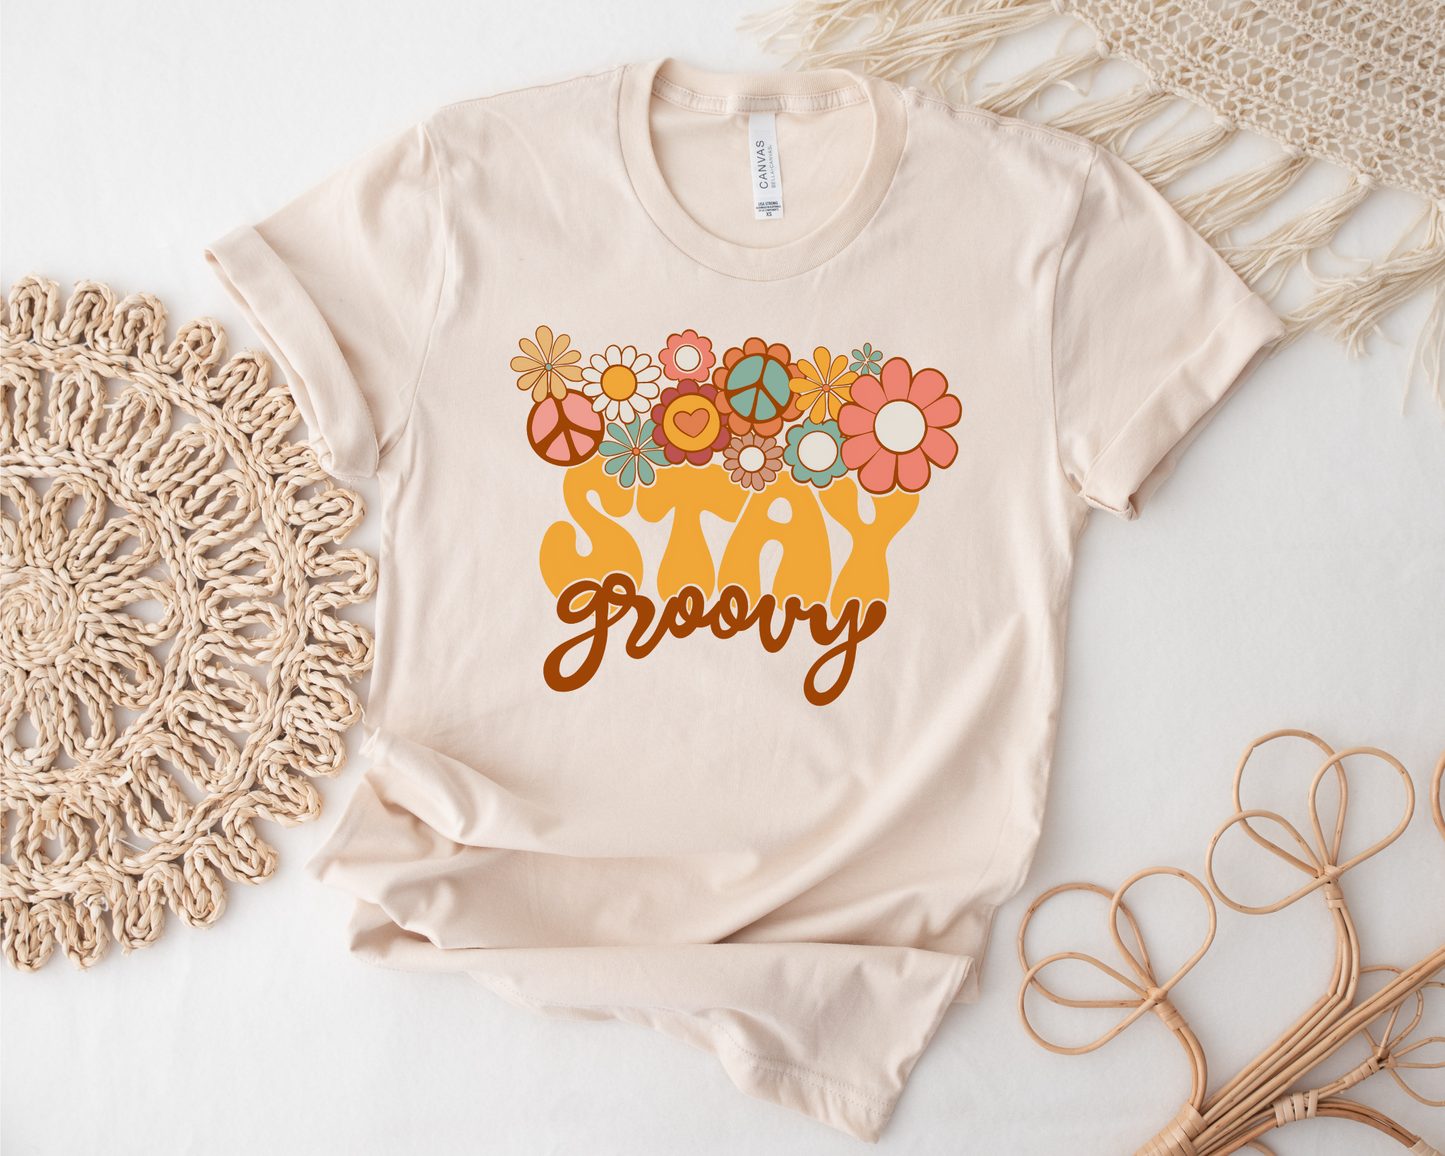 Stay Groovy Adult Shirt